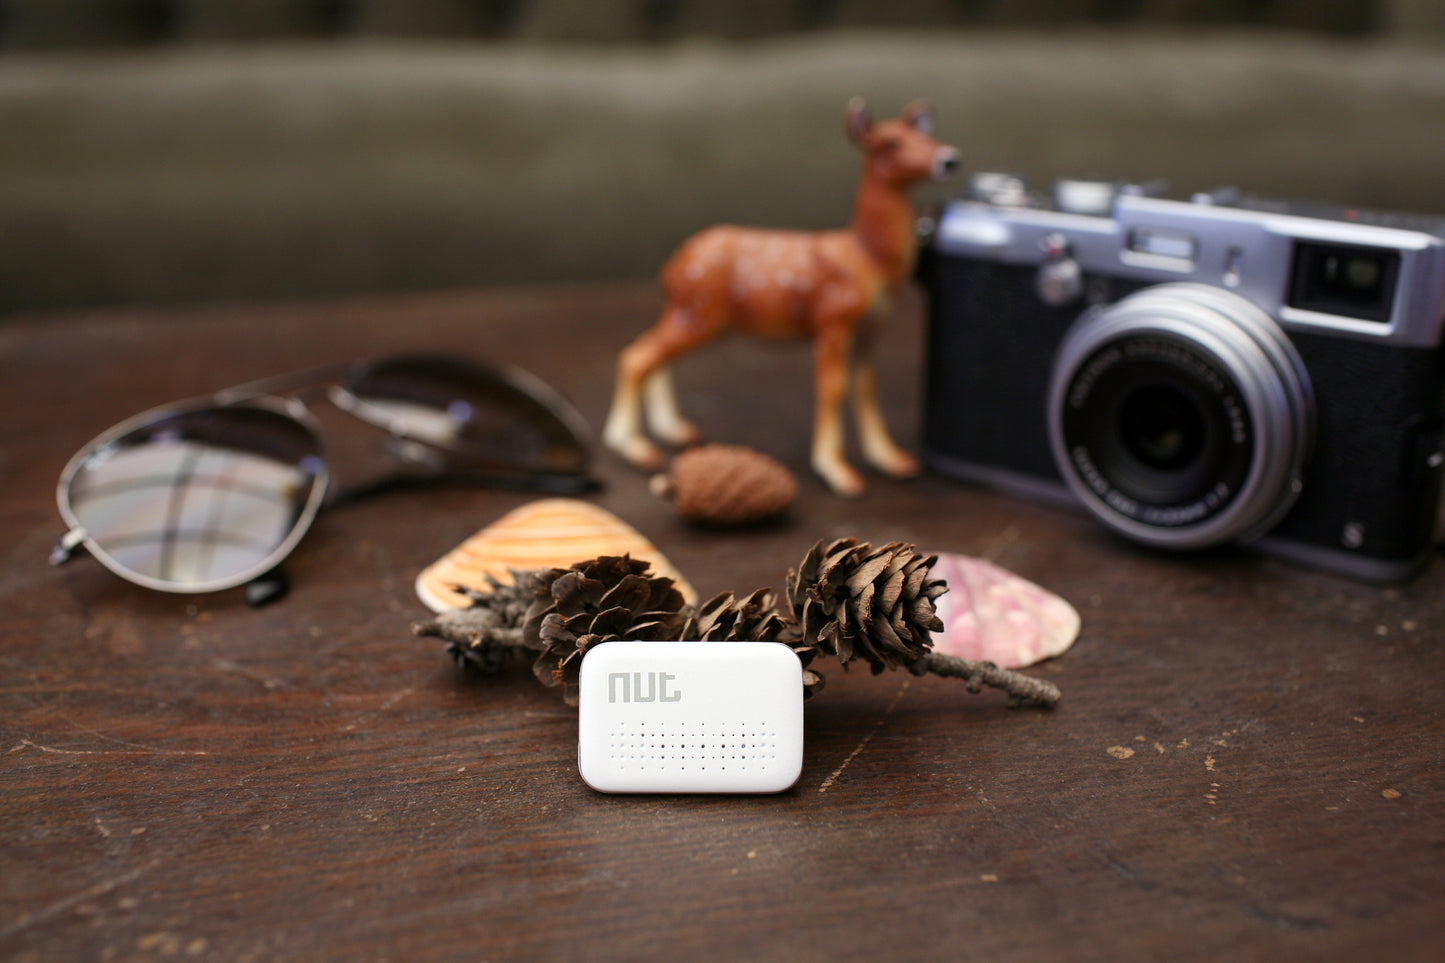 Nut mini (F6)- Small Bluetooth tracker, replaceable battery. White